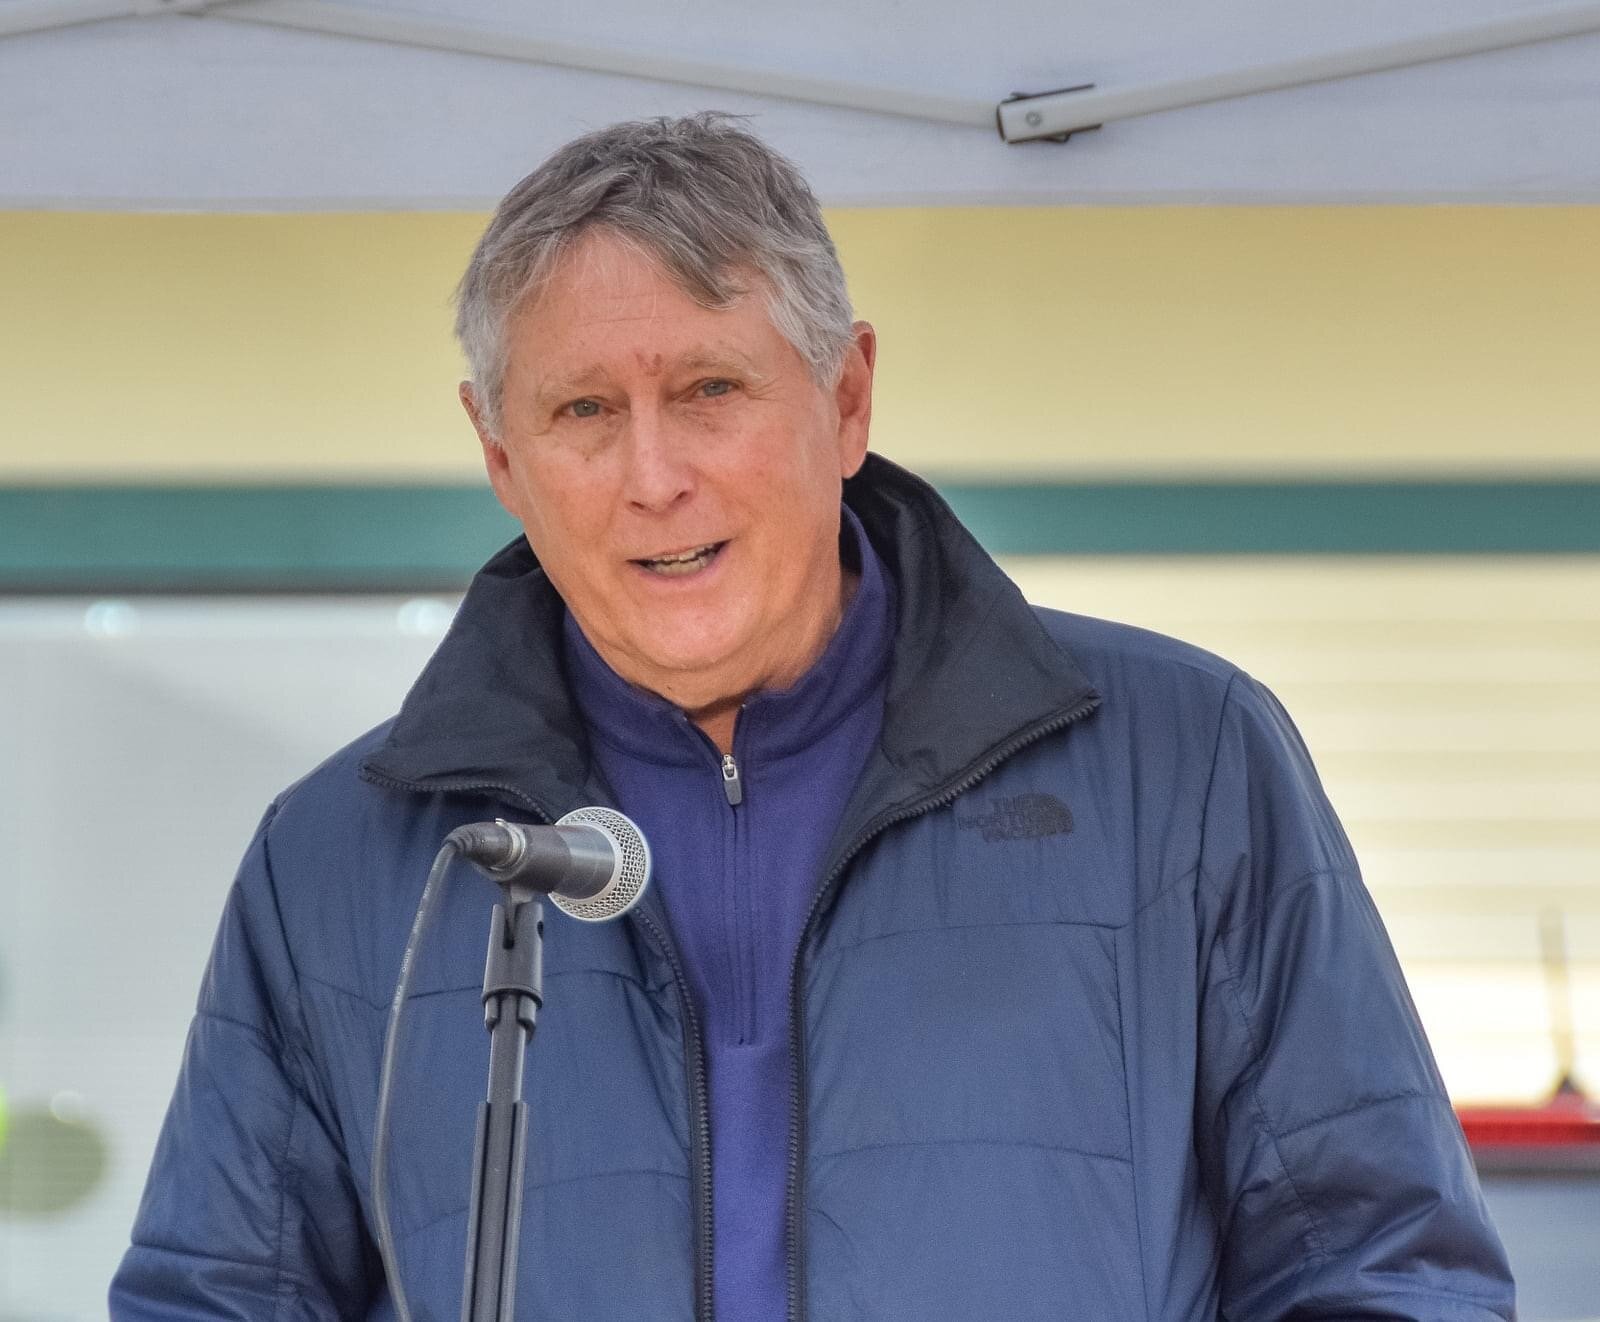 Terry Blanchard, Board President, speaking at 119 New Athol Road Opening ceremony. (picture credit to Mitchell Grosky)